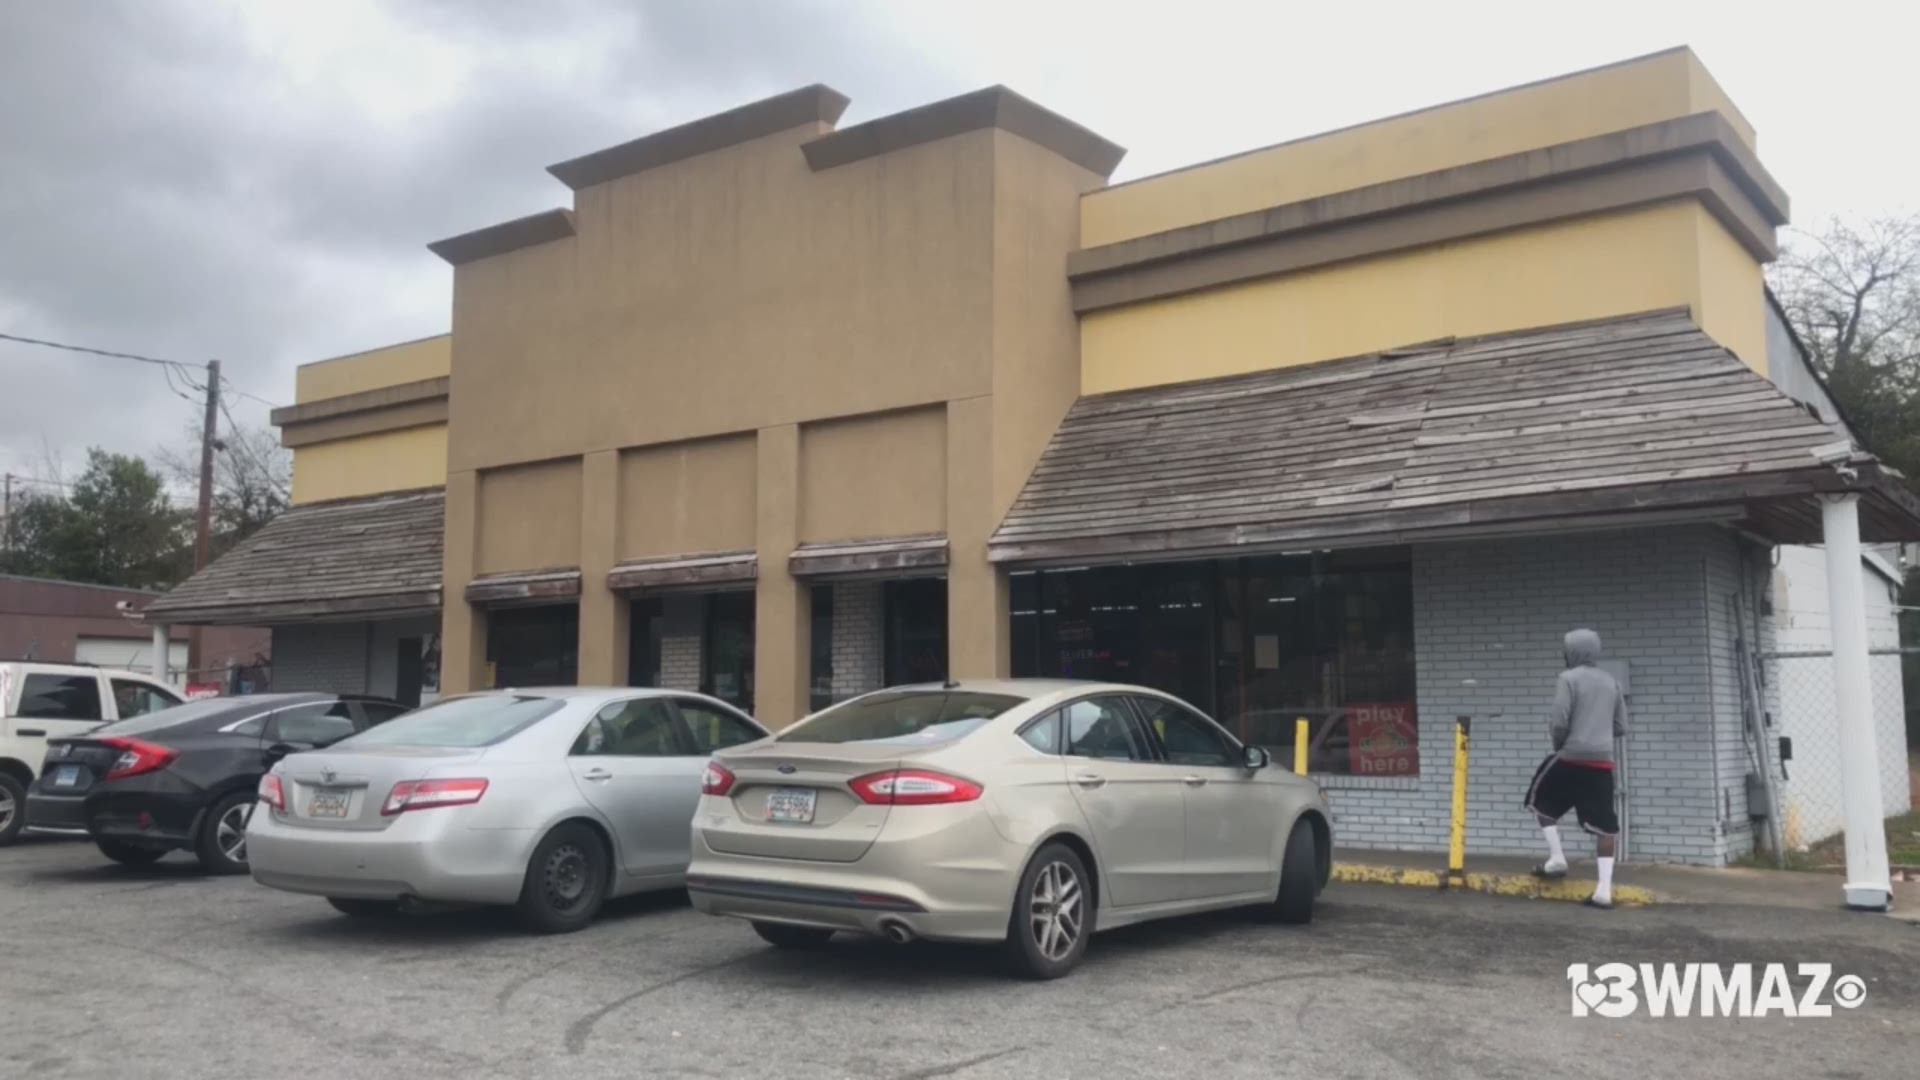 Bibb County commissioners rejected an alcohol license Tuesday for a south Macon store that's become a hot spot for violent crime.